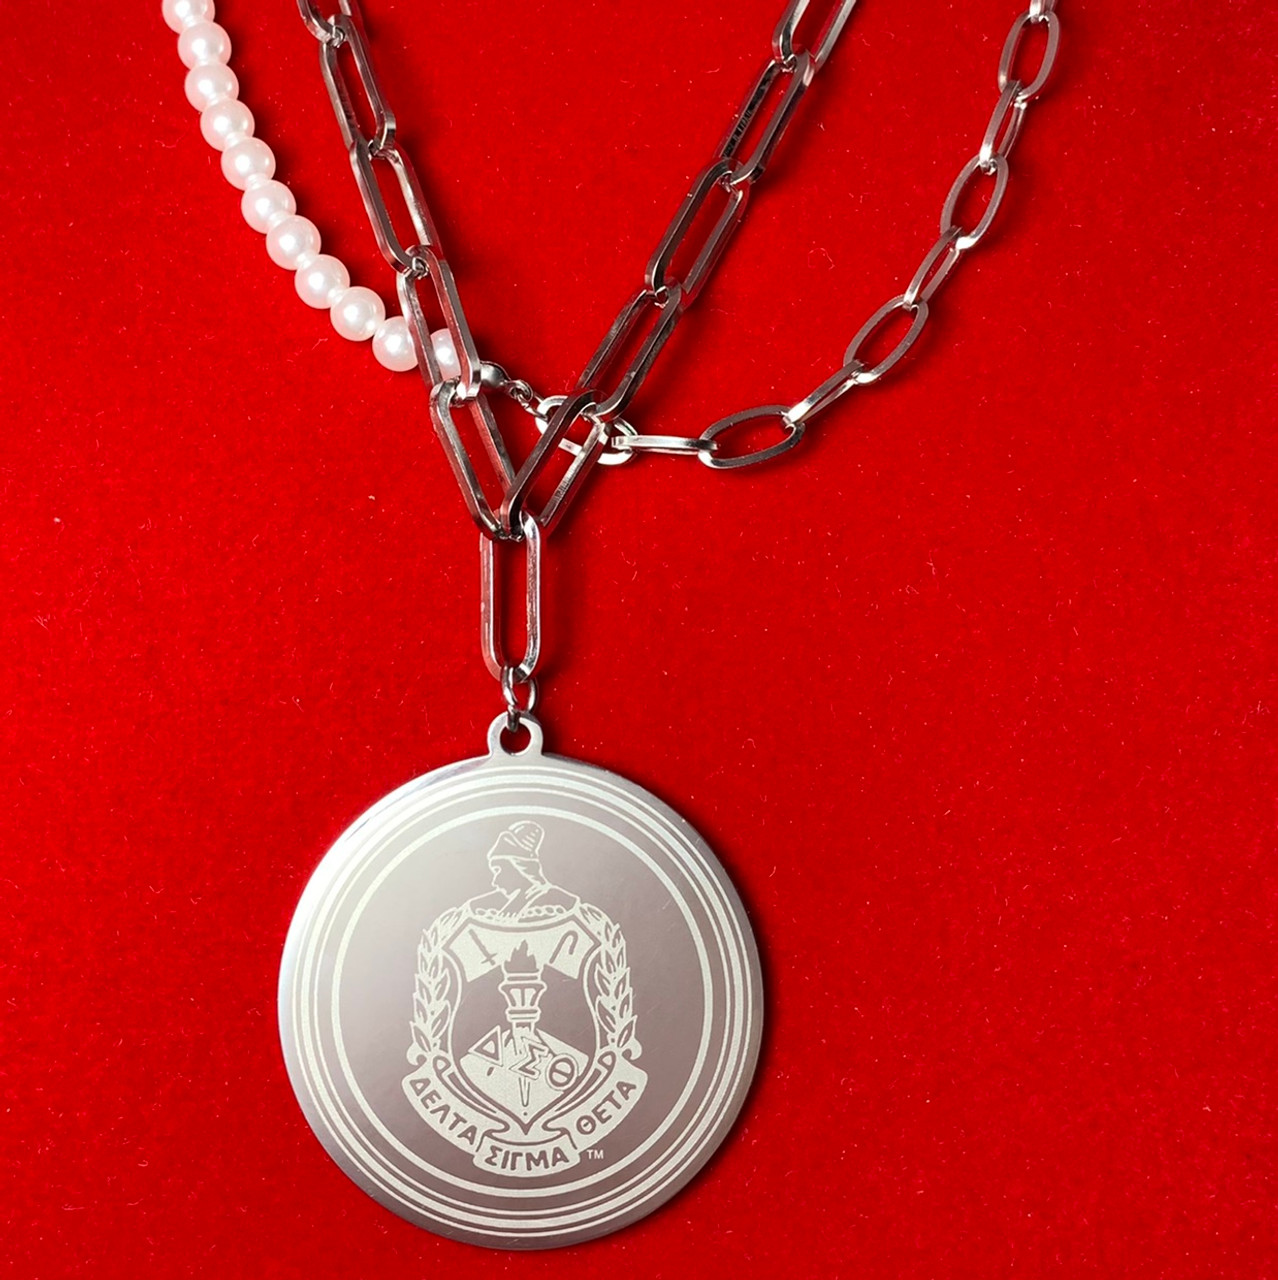 2-layer Pearls and Steel 18” Necklace- ENGRAVED Delta symbols